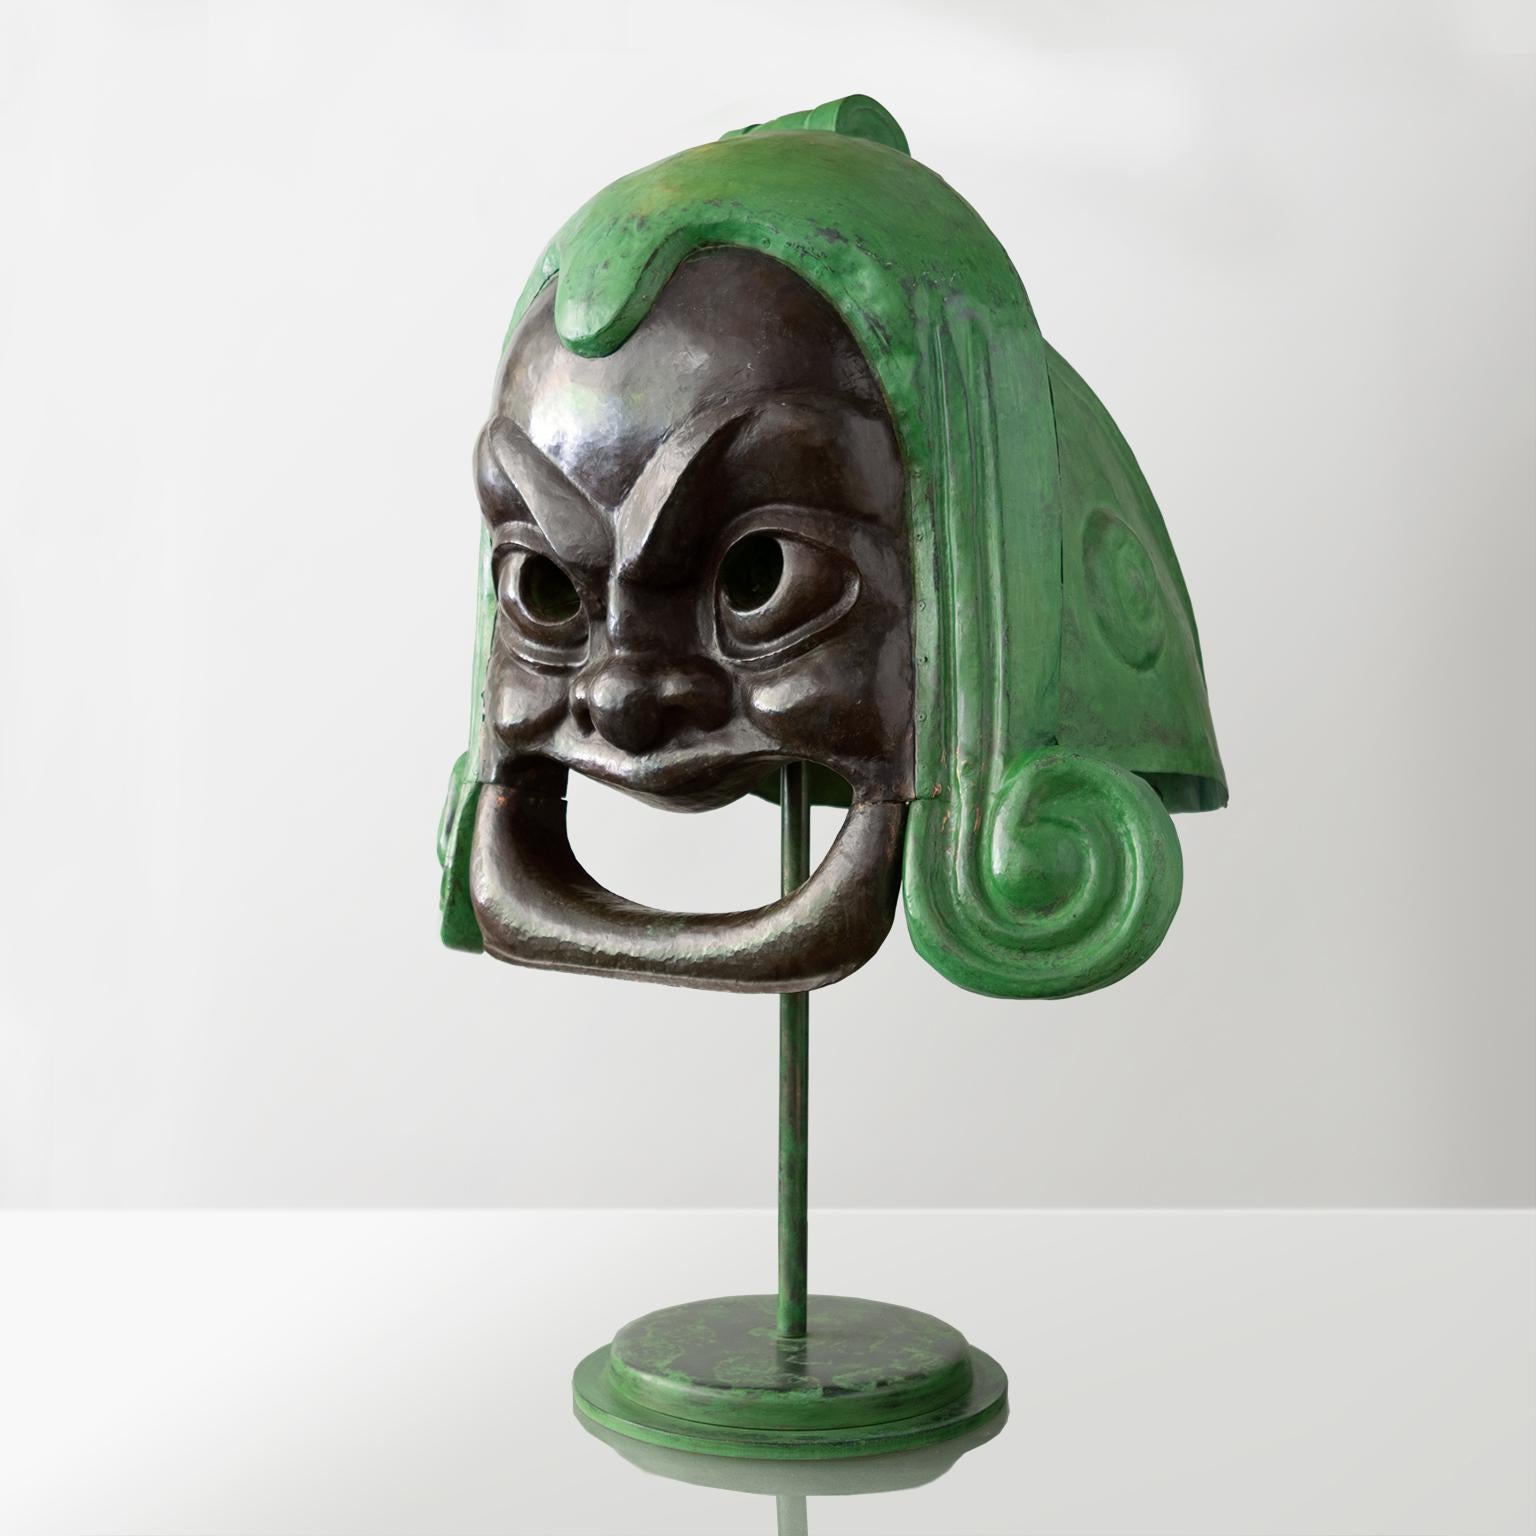 A large exterior sculpture from the circa 1918 Palladium theatre in Stockholm, Sweden. Made completely of copper this “comedy” face is enclosed in a stylized Greek Chalcidian helmet. Newly restored the sculpture now sits on a custom iron stand which